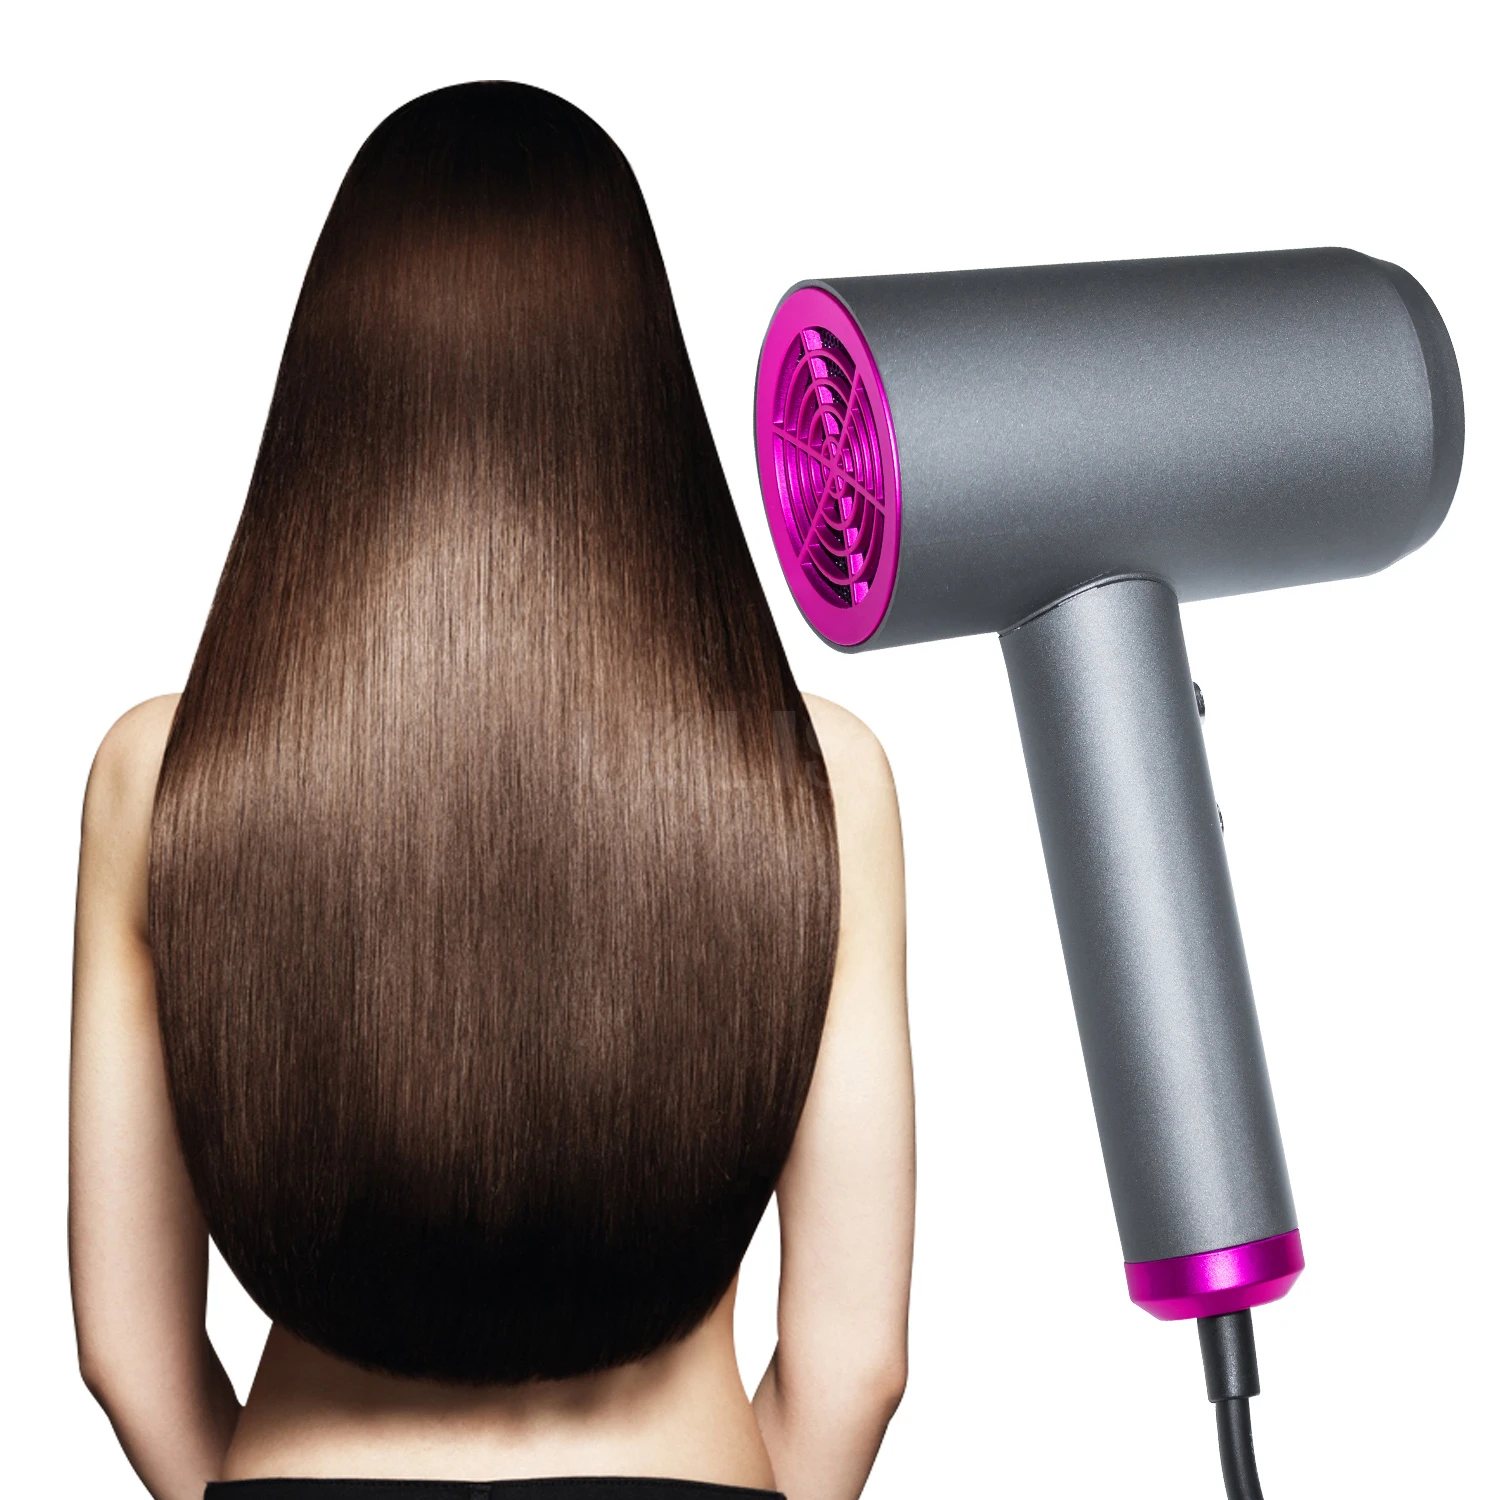 2020 Professional Salon Hair dryer 1100W Ionic Blower Dryer with Diffuser Portable Travel Hair Dryer